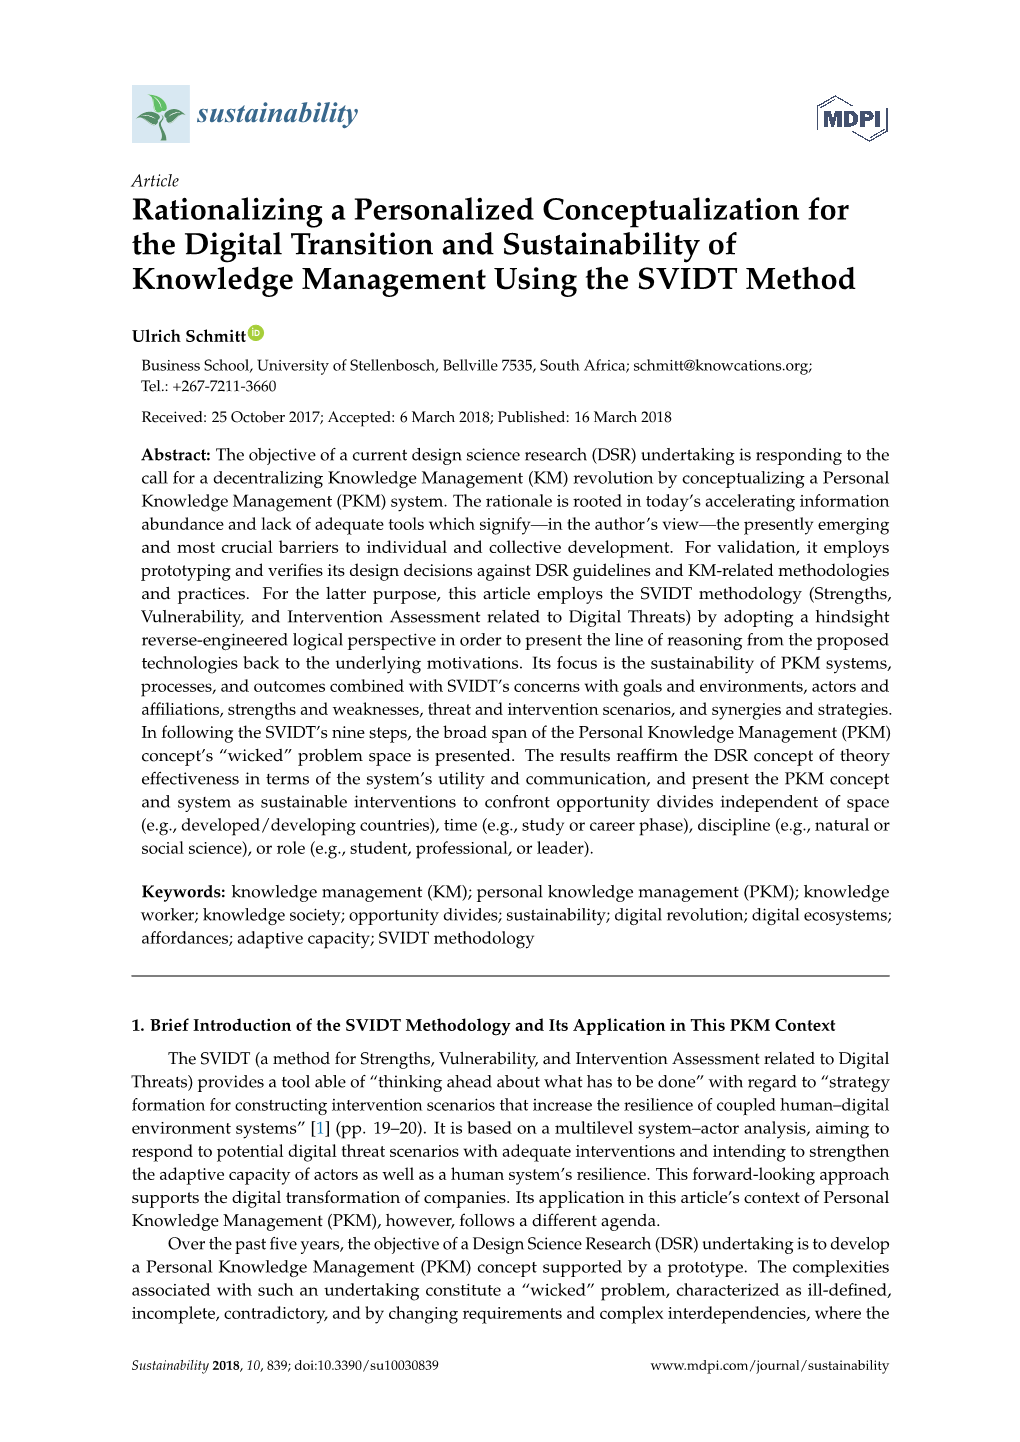 Rationalizing a Personalized Conceptualization for the Digital Transition and Sustainability of Knowledge Management Using the SVIDT Method